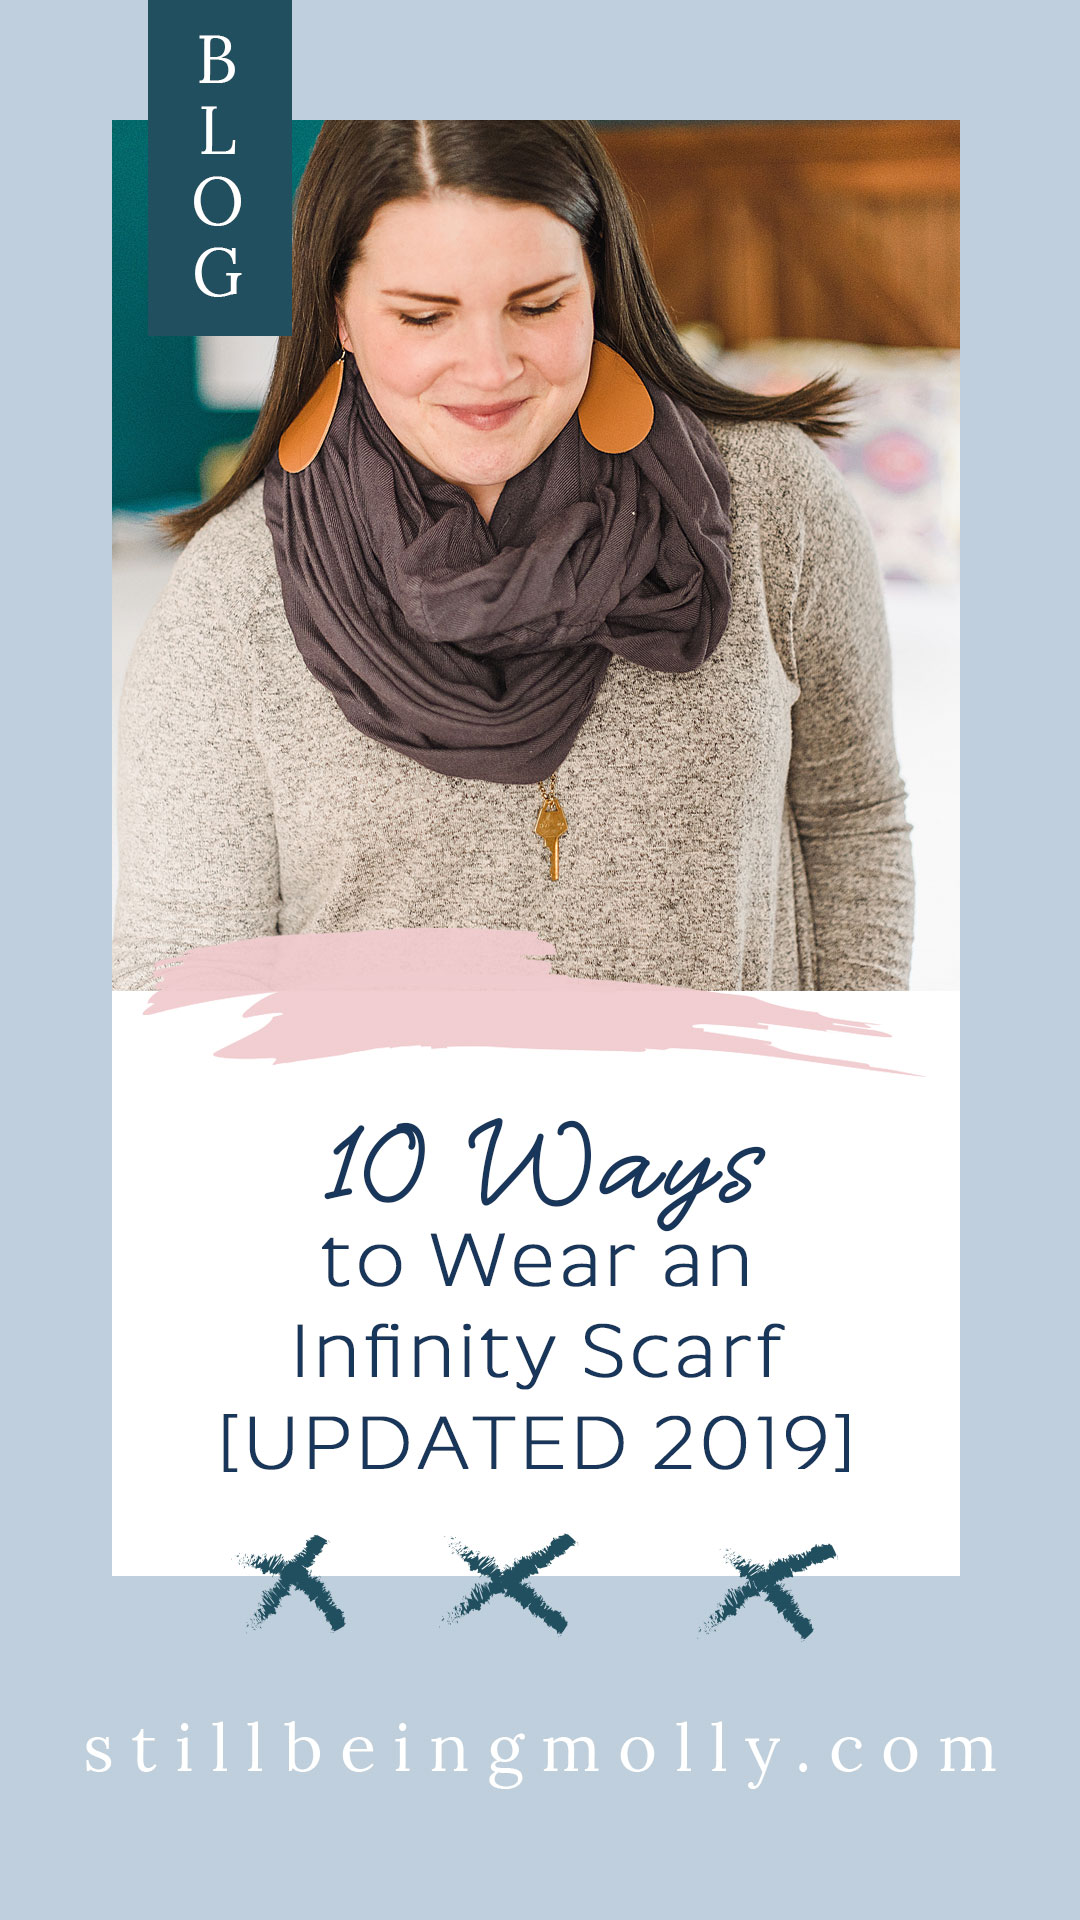 STYLE: 10 Ways to Wear an Infinity Scarf [UPDATED 2019] (1)